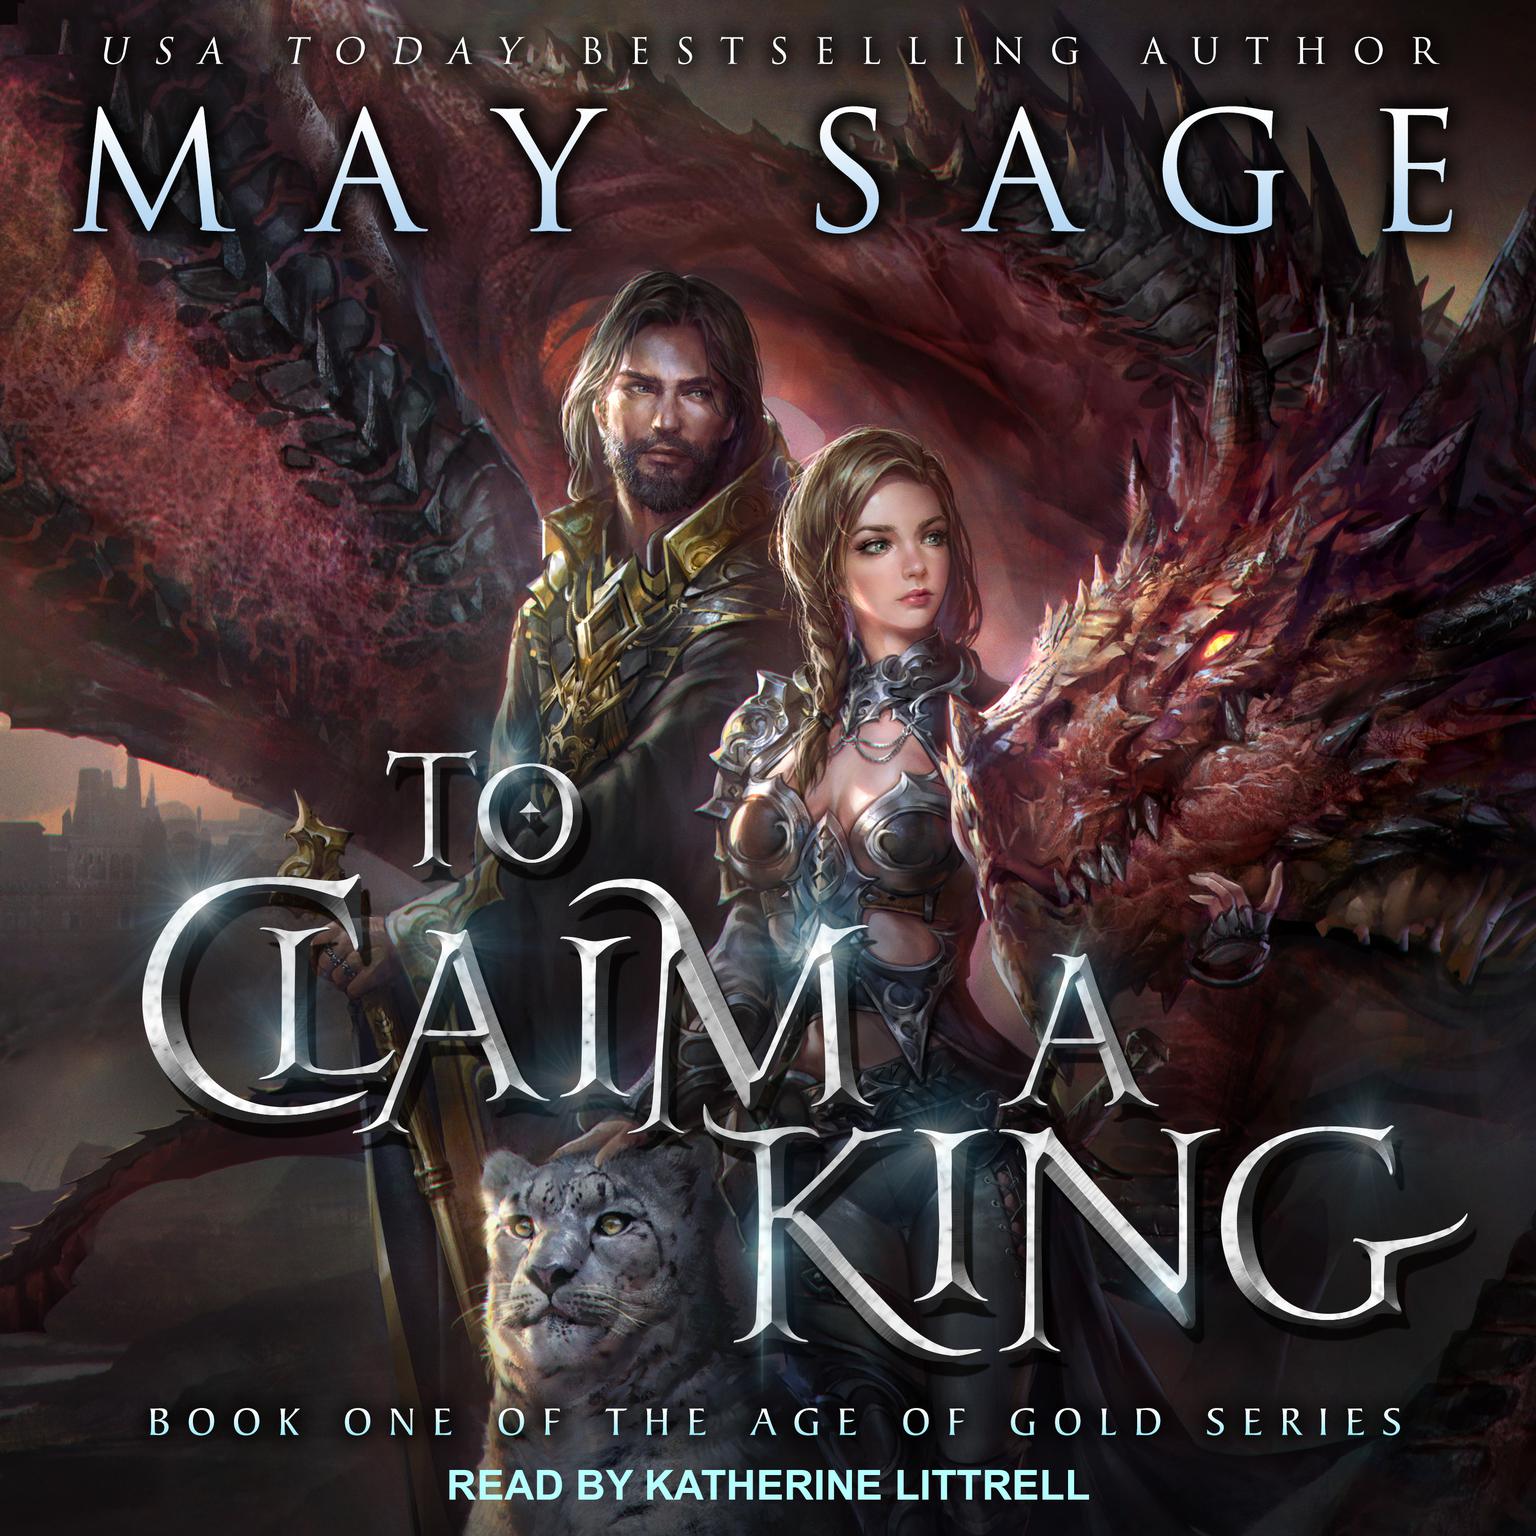 To Claim a King Audiobook, by May Sage